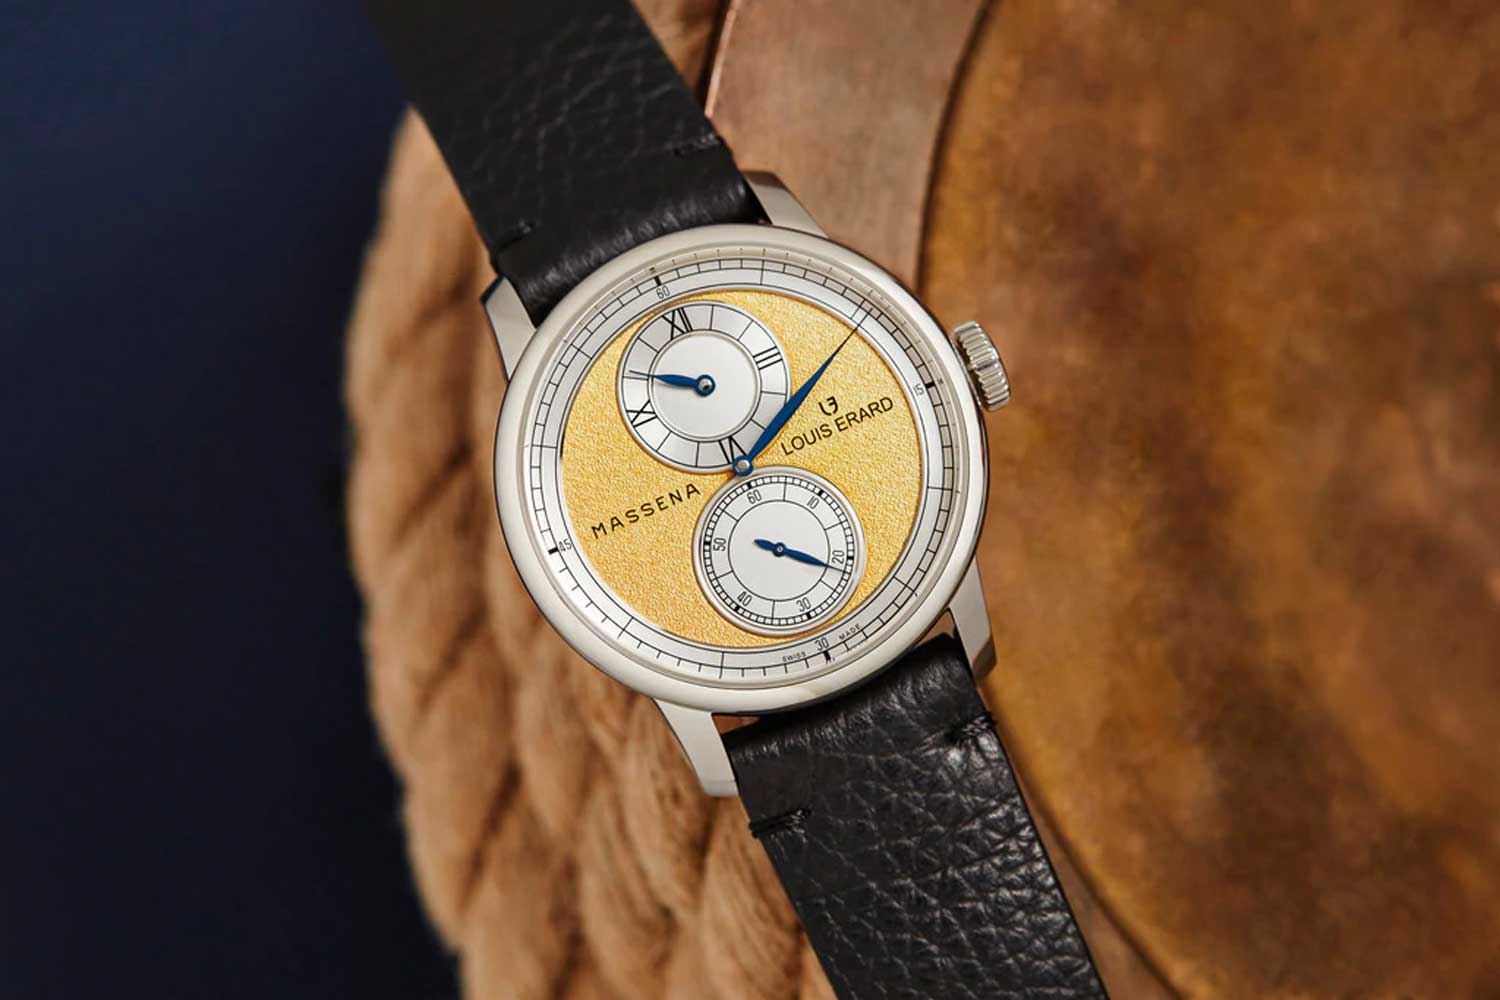 Le Régulateur Louis Erard × Massena LAB with the dial has the lower layer plated in 2N gold